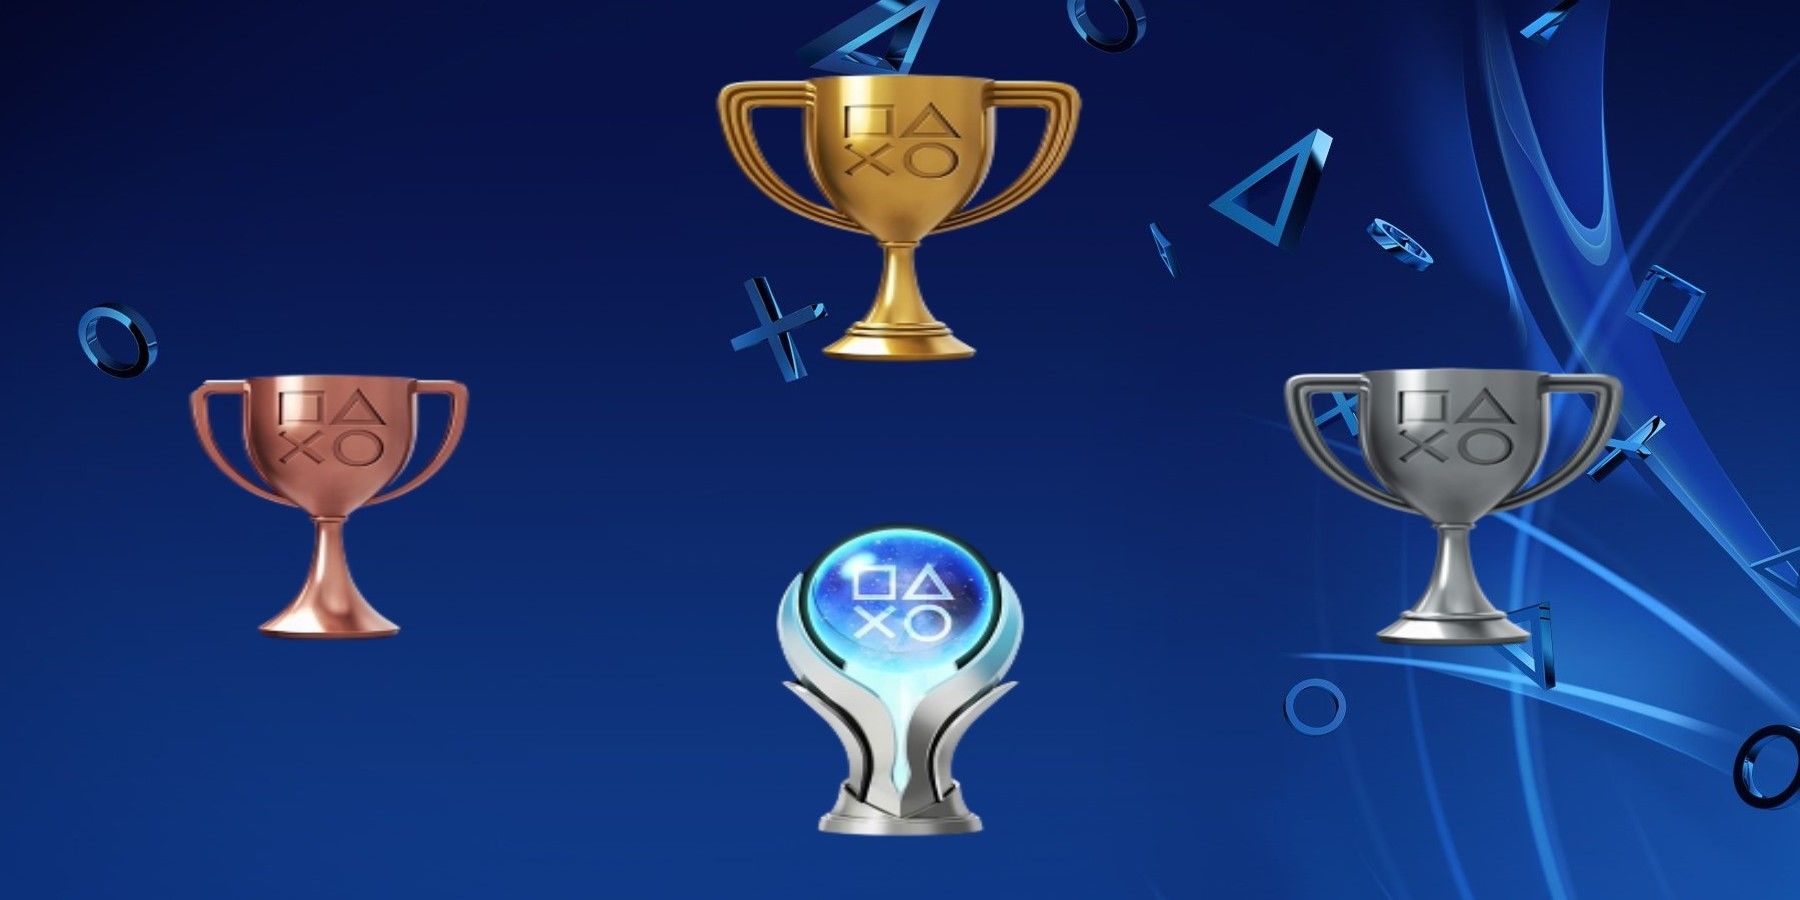 PlayStation Trophy enhancements coming with a new leveling